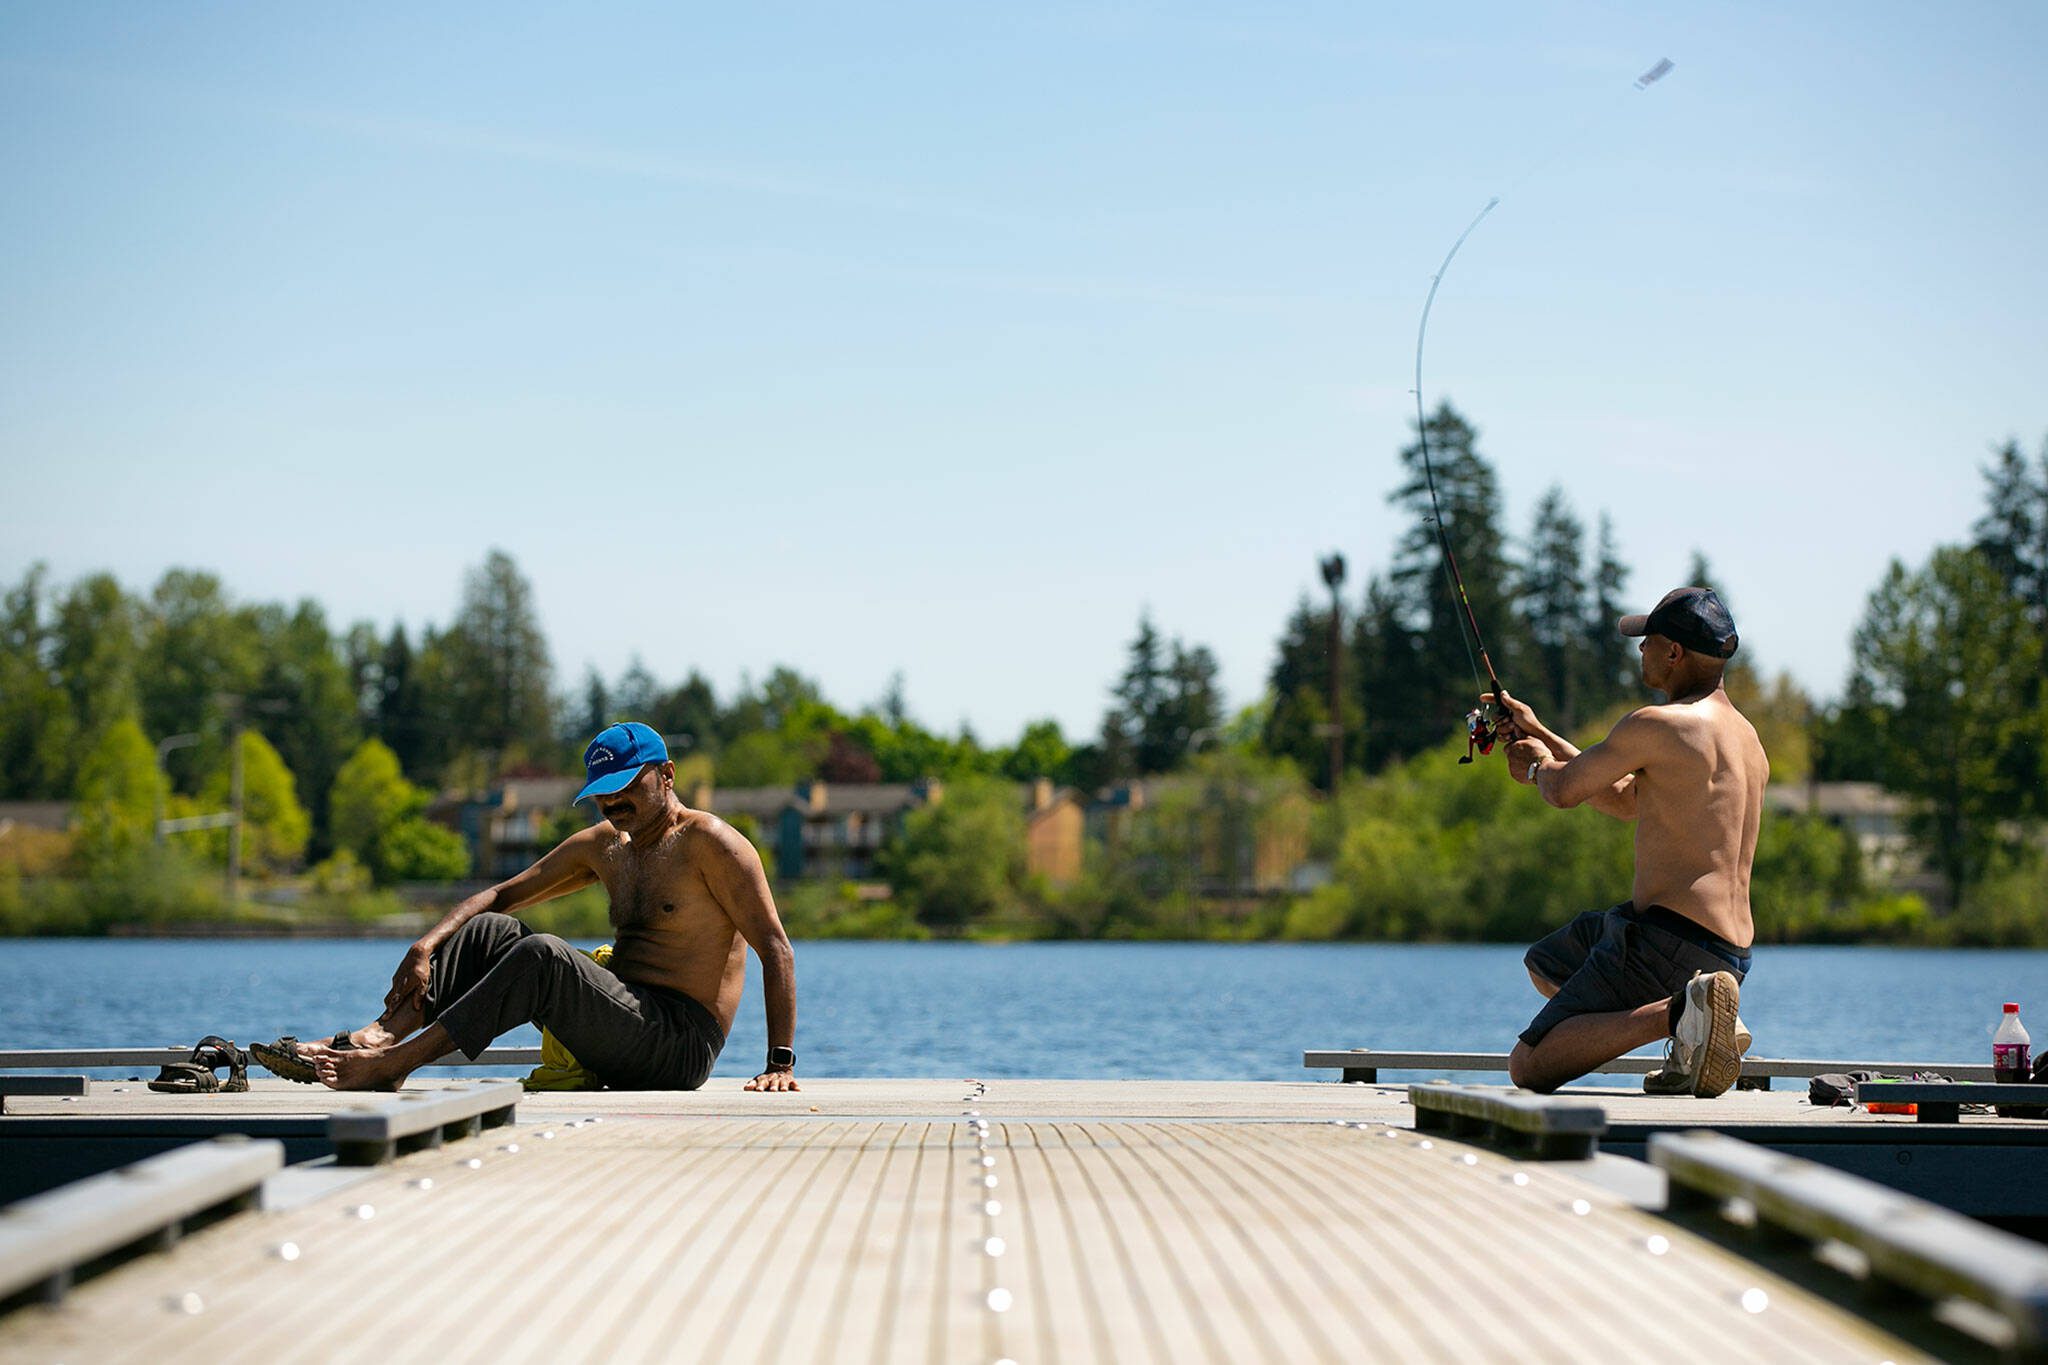 Two men bask in the sun while fishing for bass at Silver Lake in Everett on Friday. (Ryan Berry / The Herald)